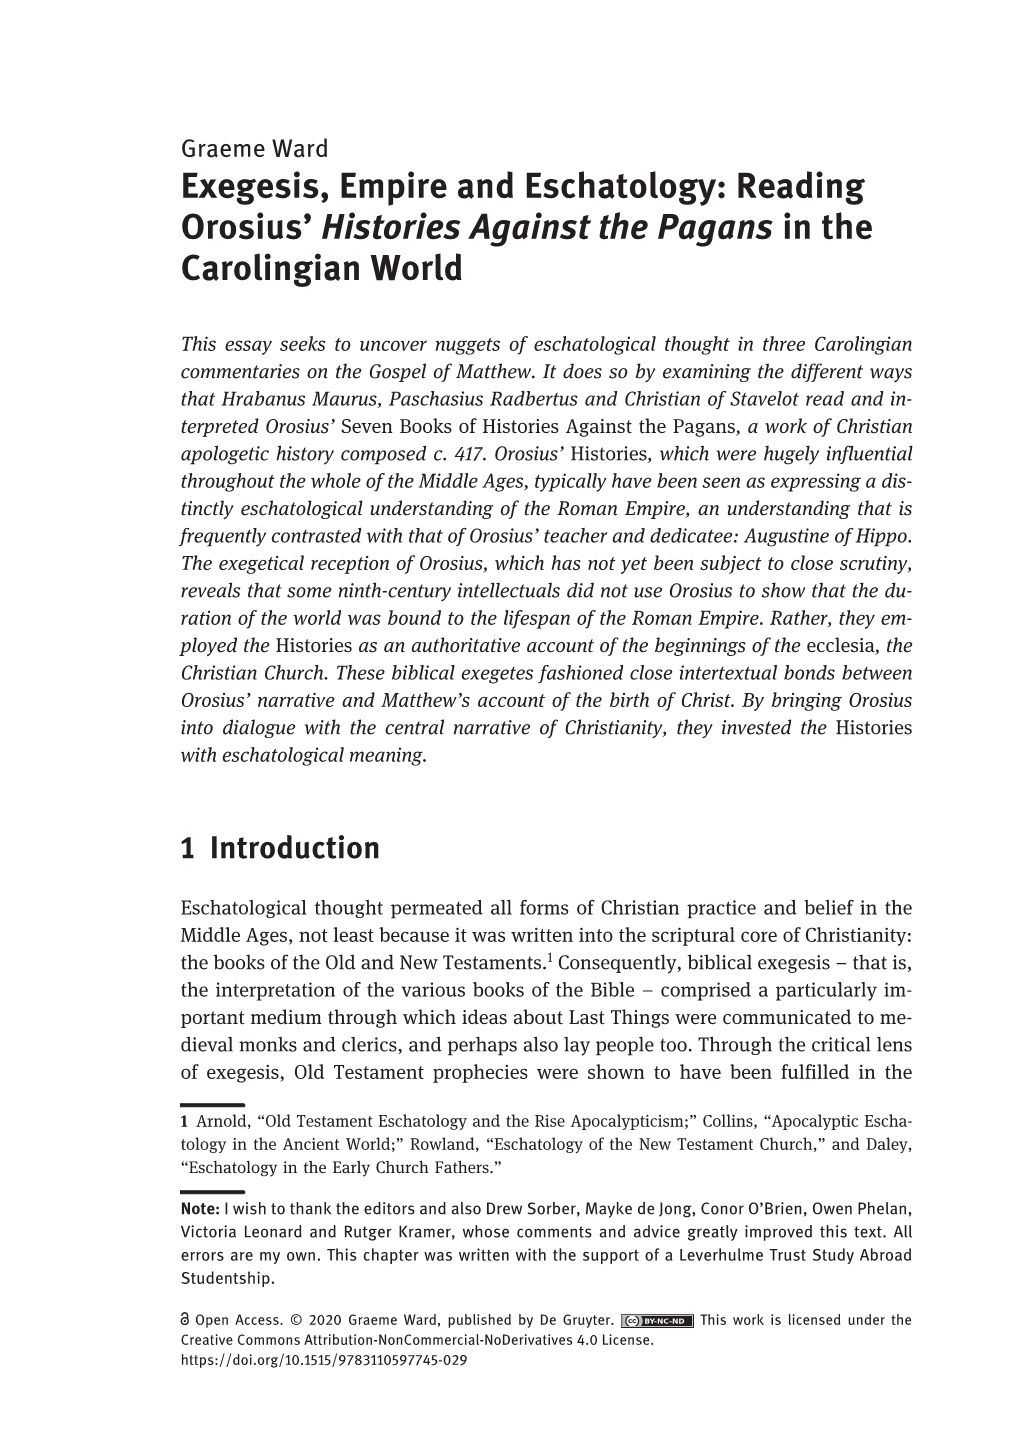 Exegesis, Empire and Eschatology: Reading Orosius’ Histories Against the Pagans in the Carolingian World